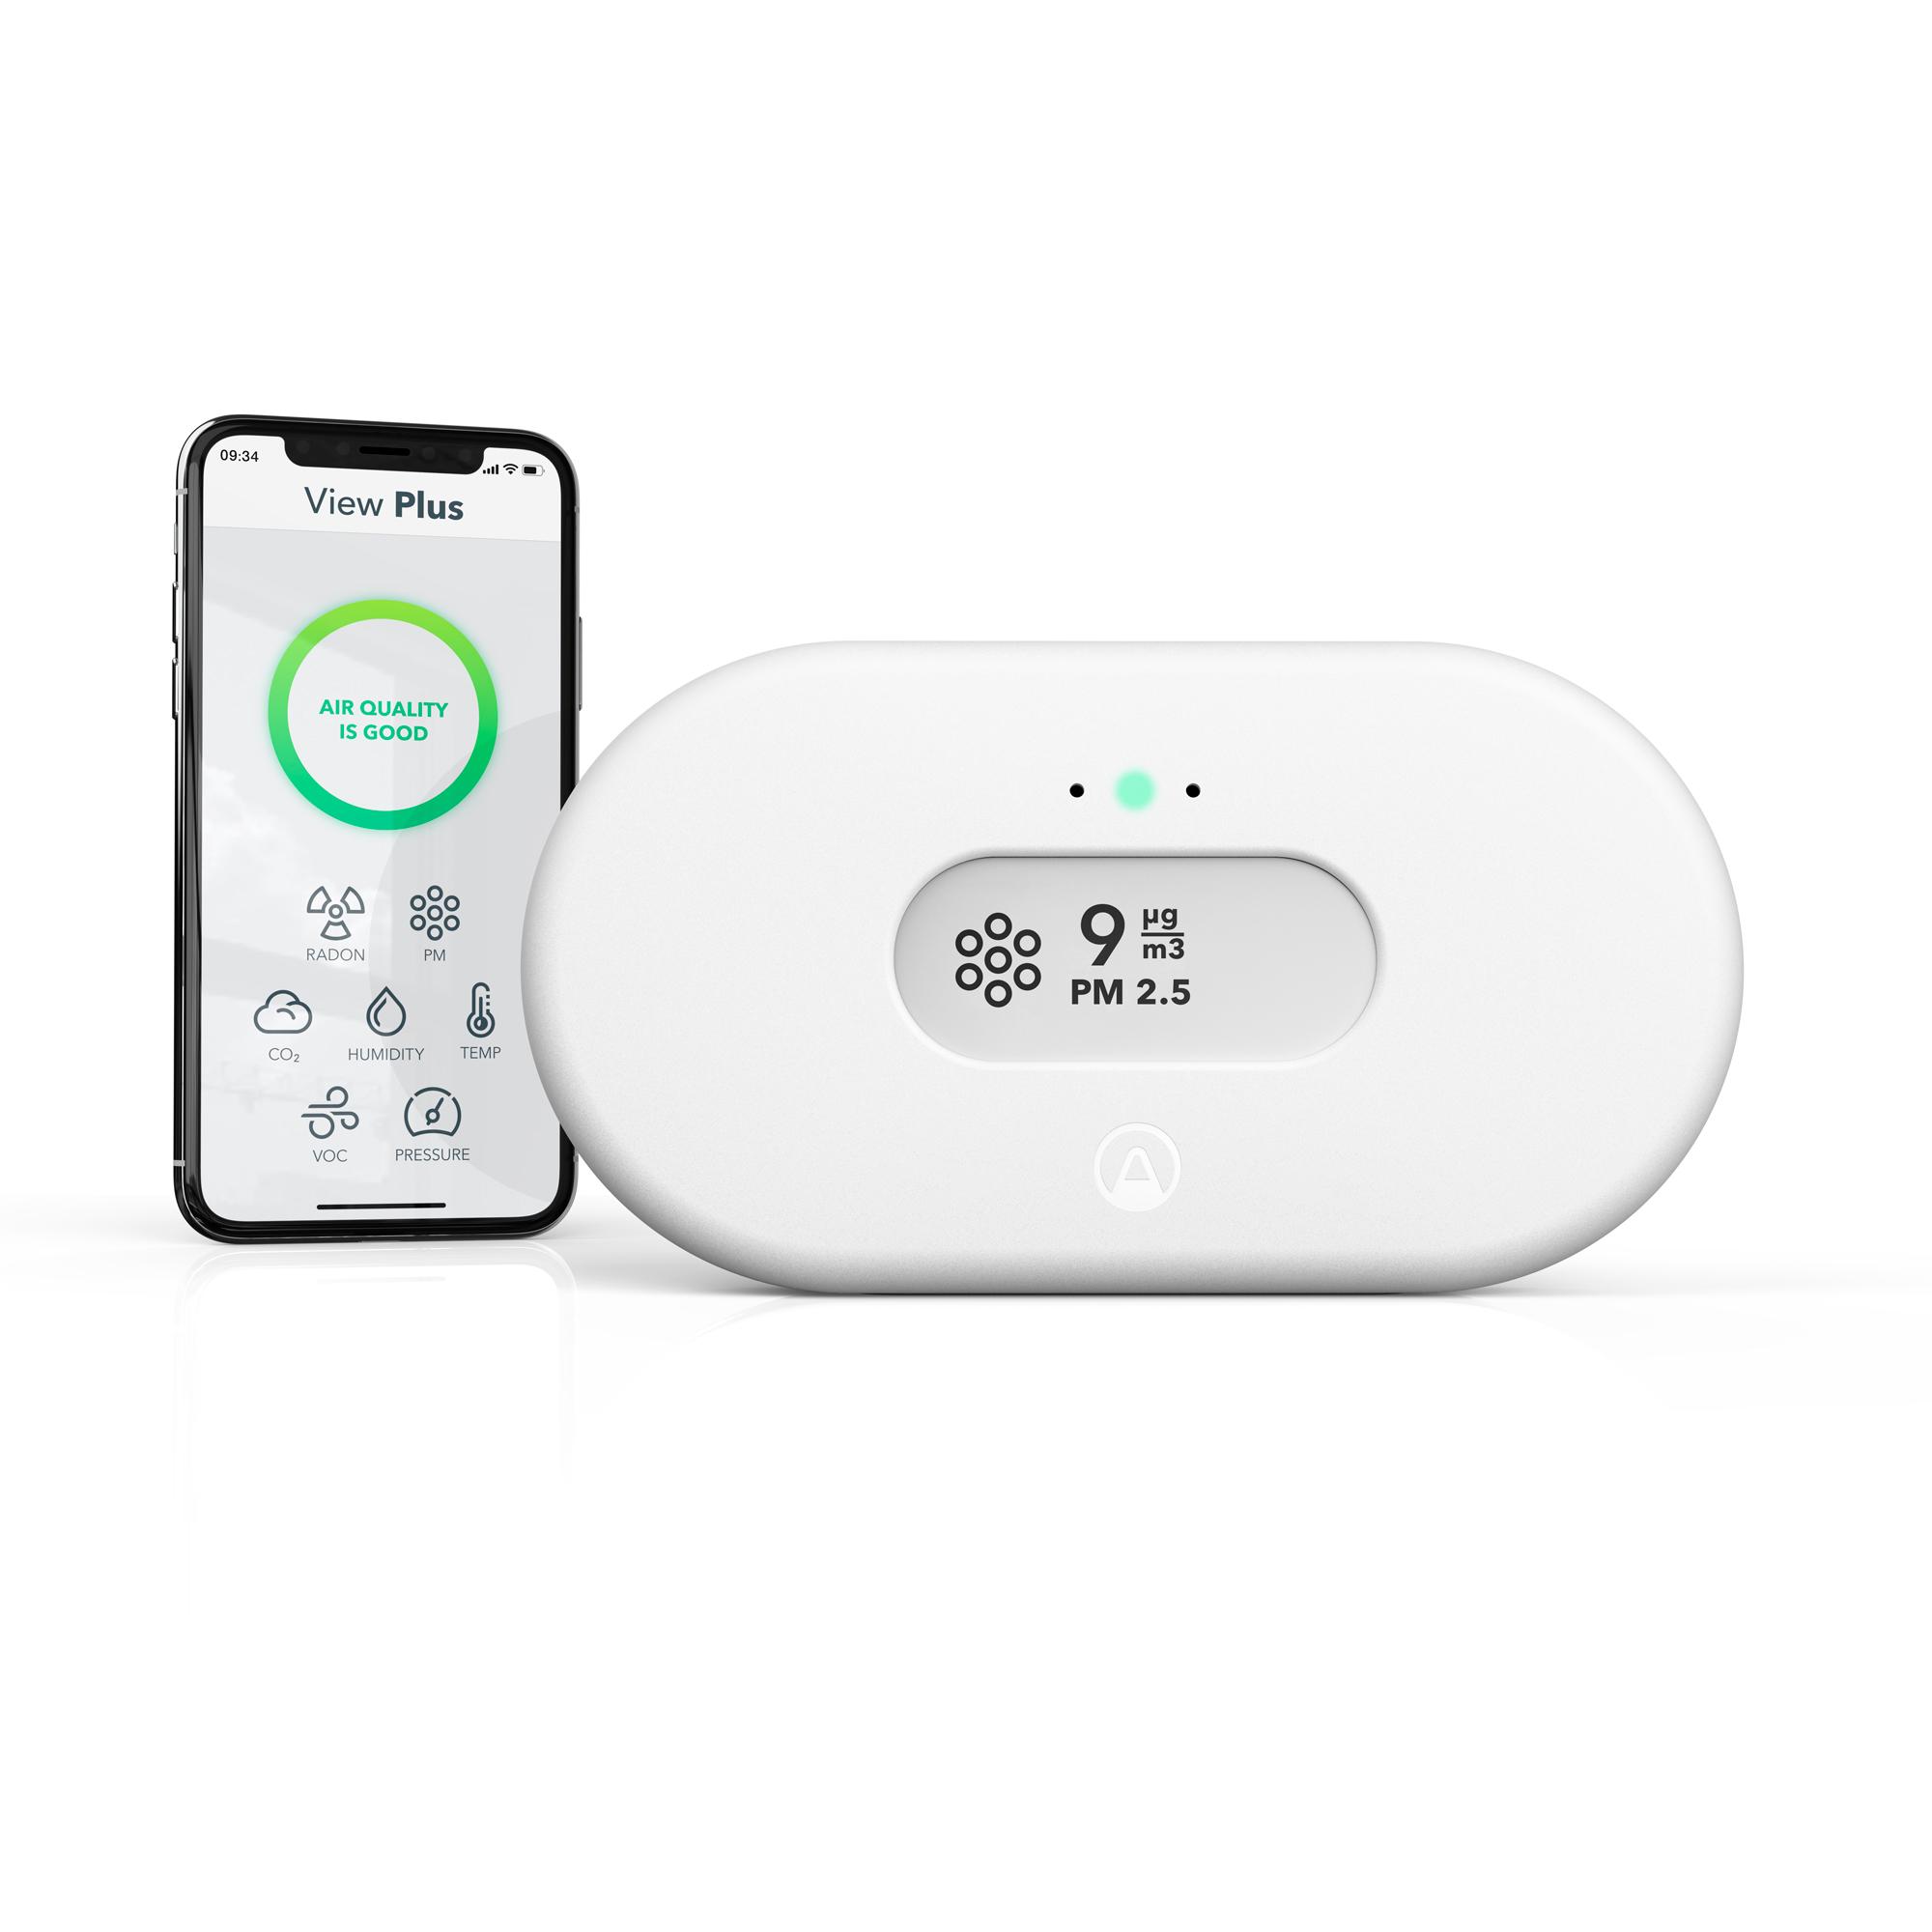 Image of AIRTHINGS View Plus Indoor Air Quality Monitor, White